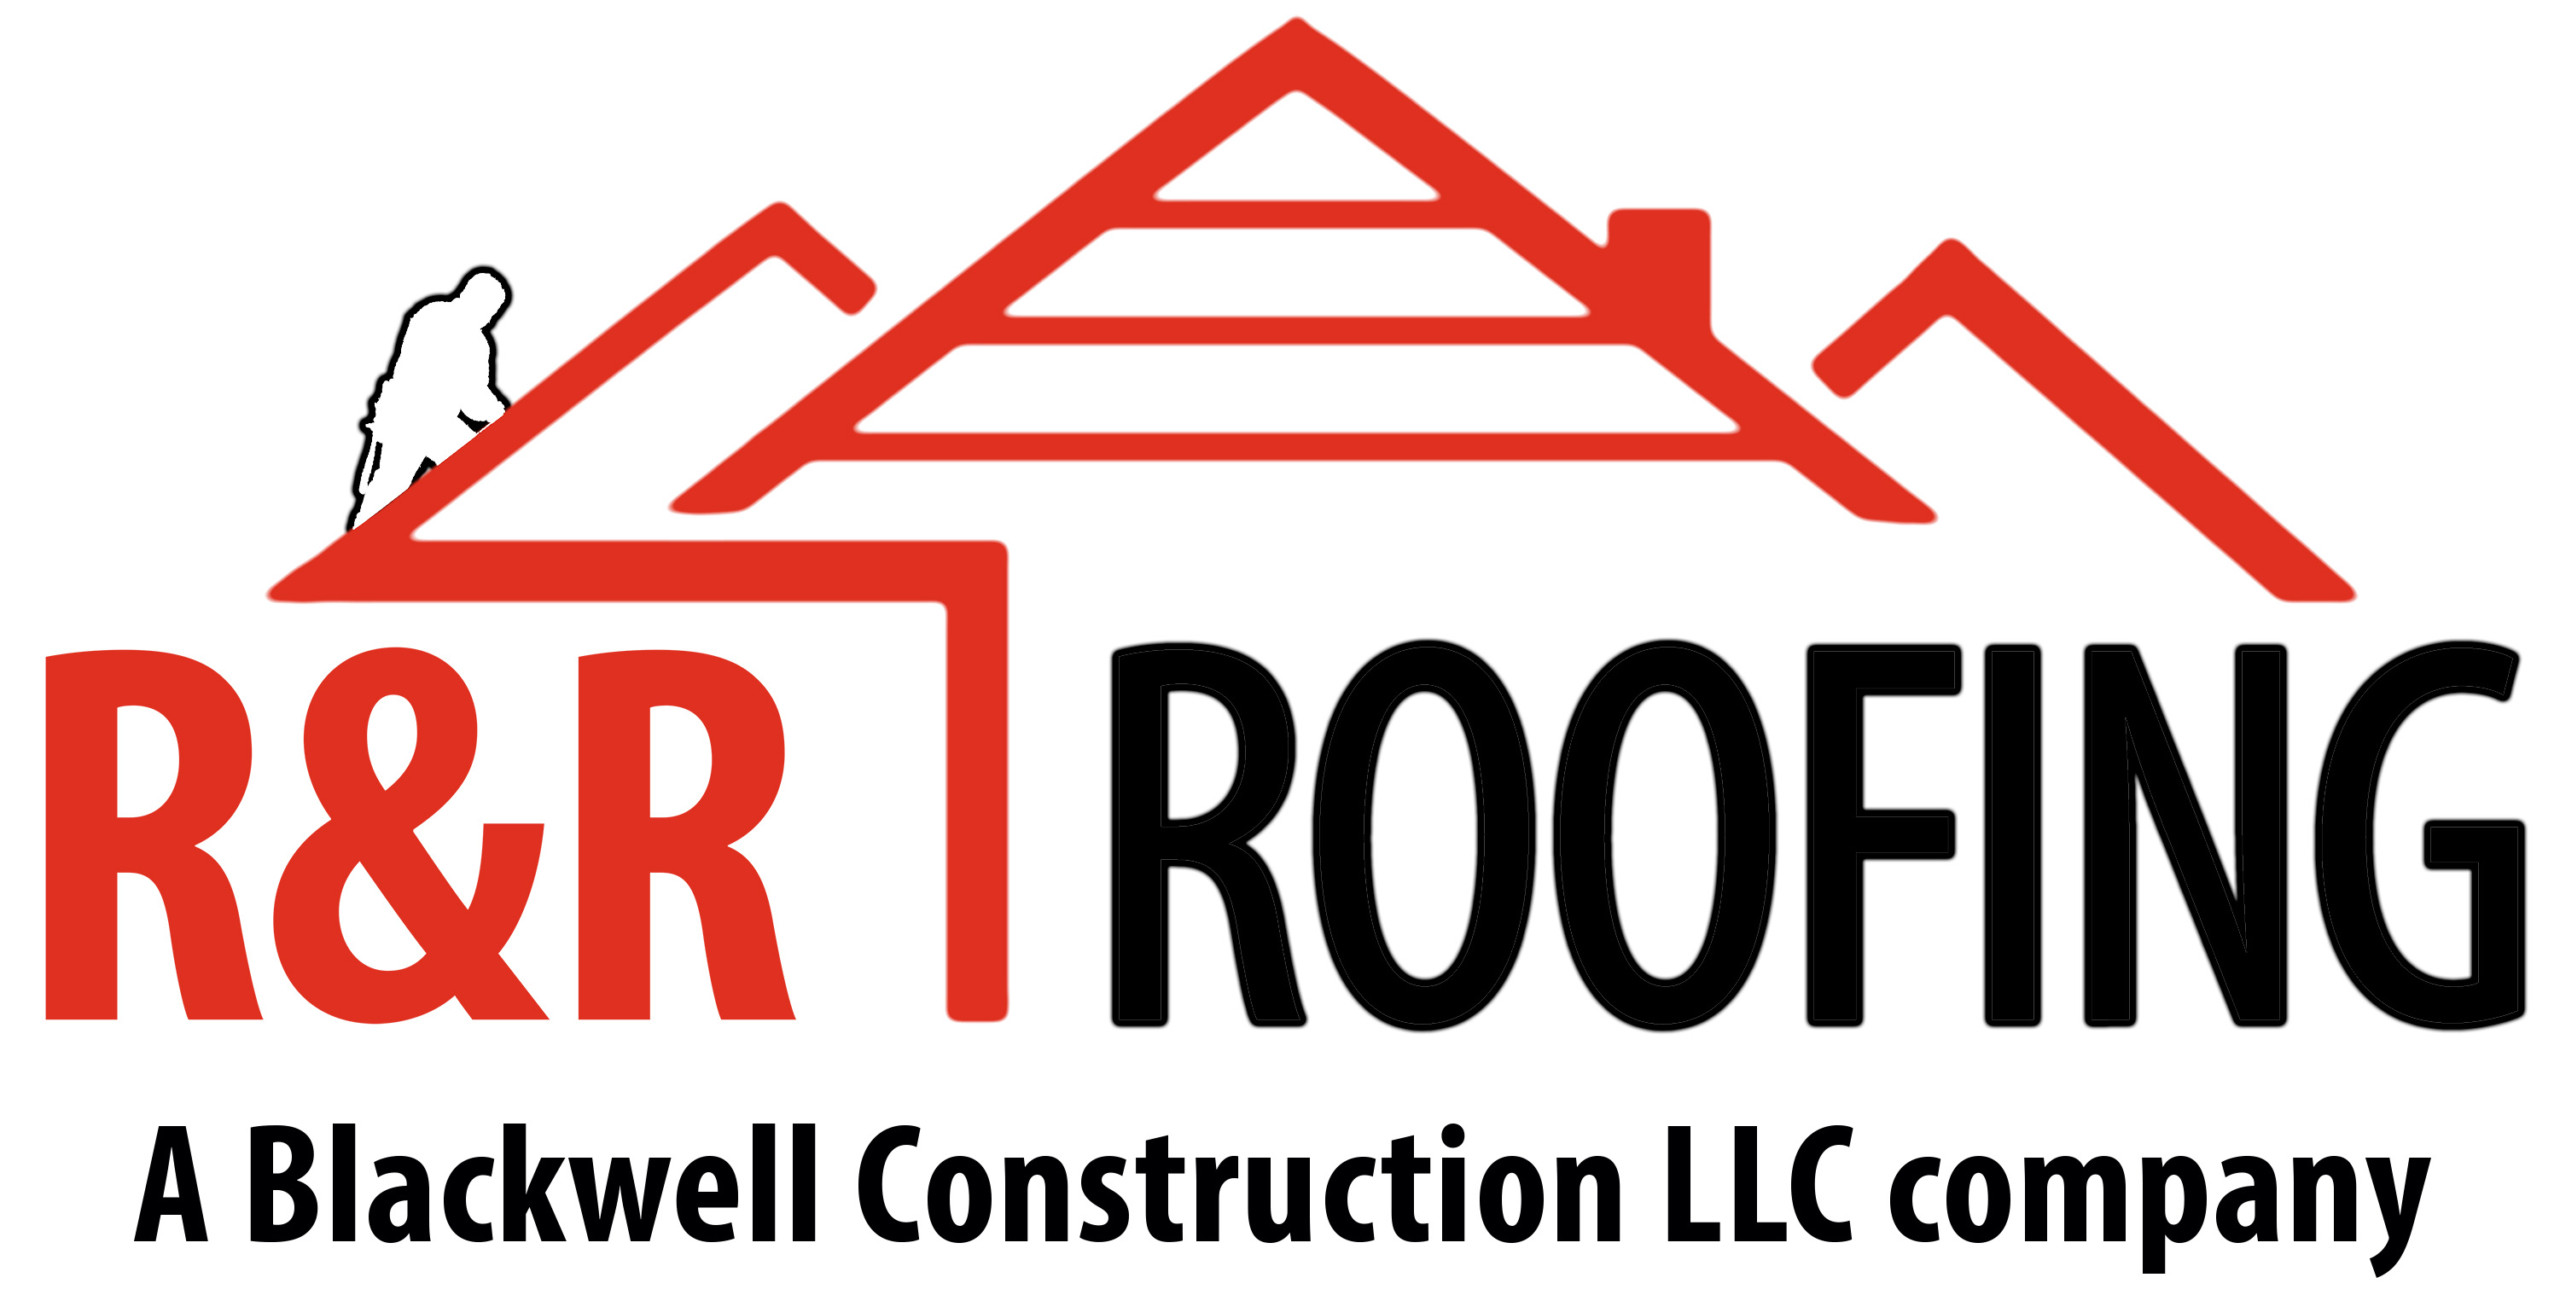 R&R Roofing - (502) 222-ROOF - R&R Roofing